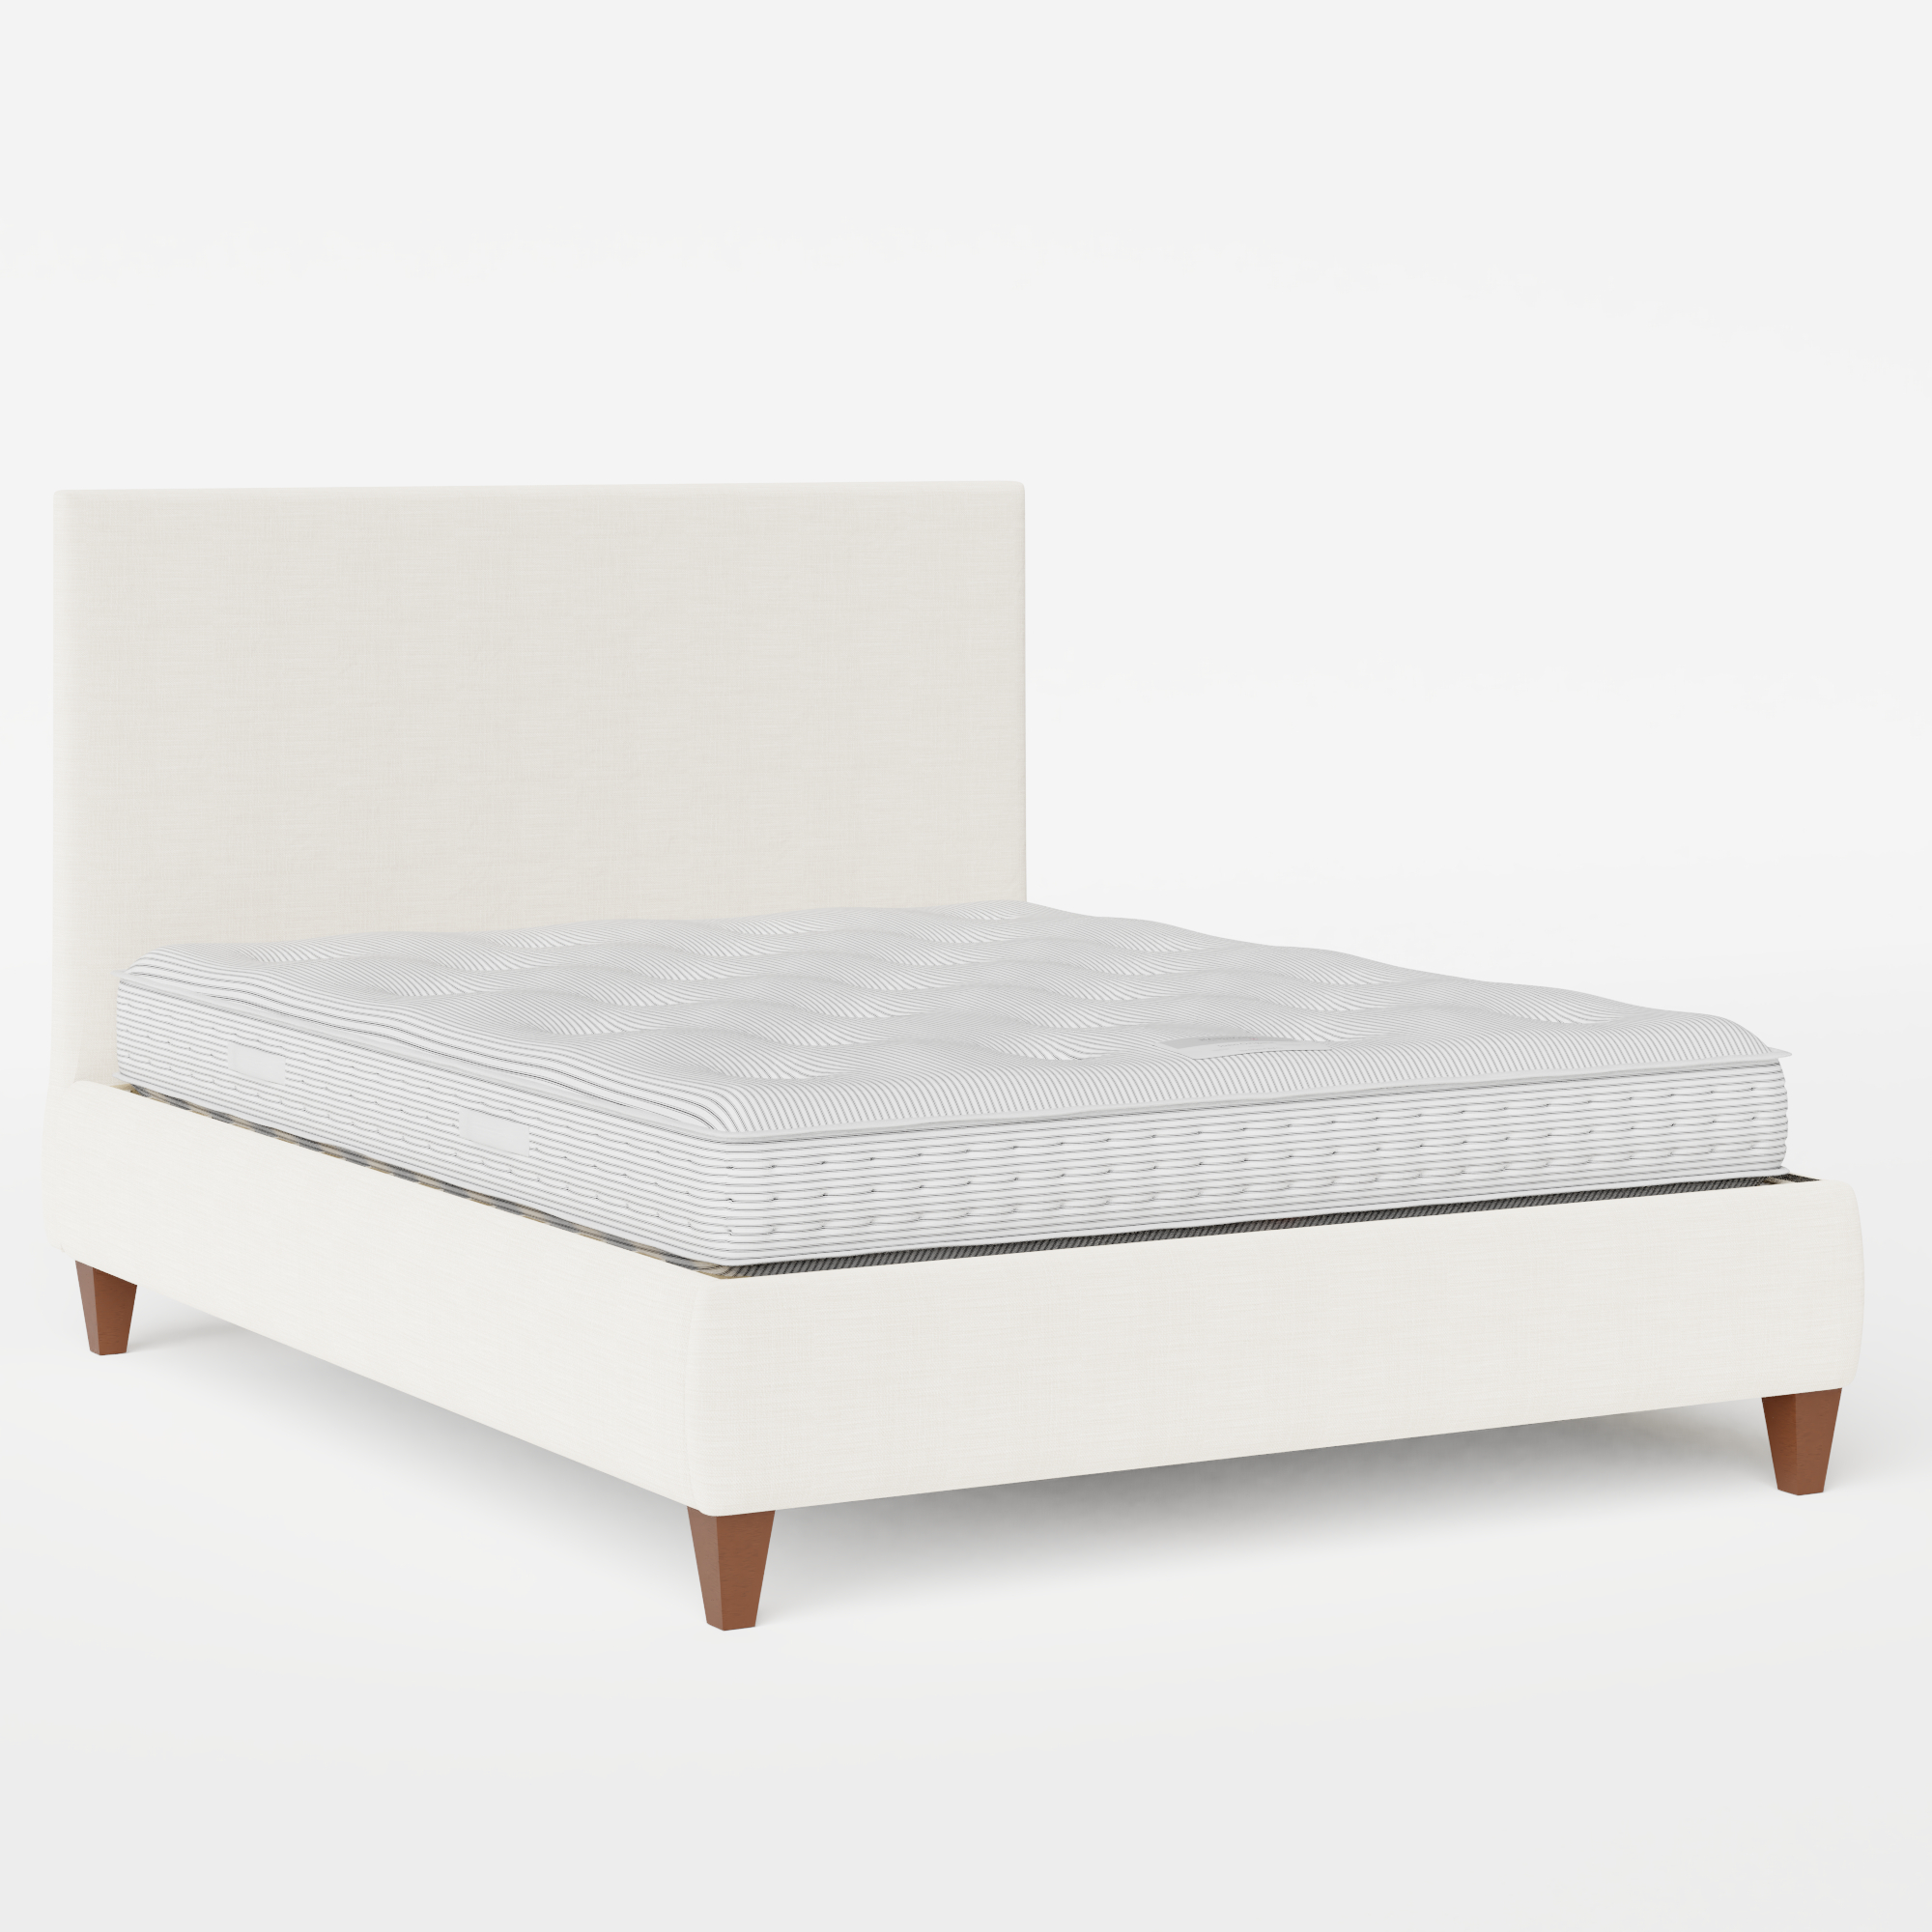 Yushan upholstered bed in mist fabric